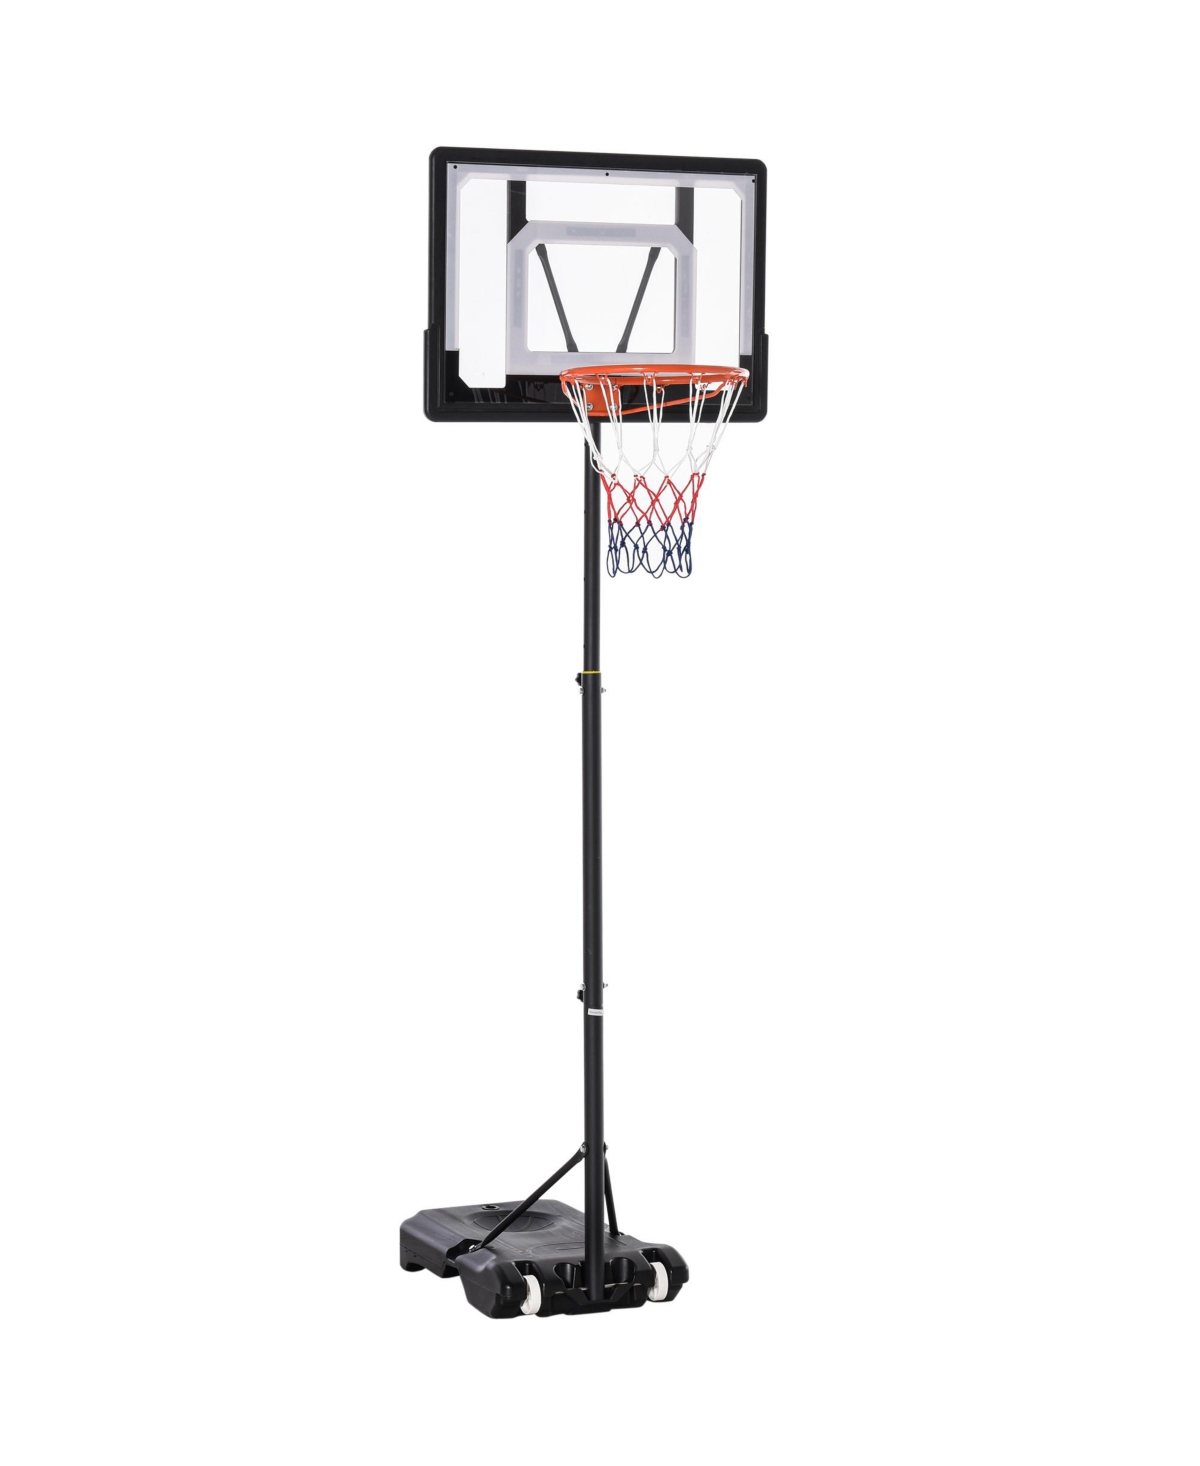 Portable Basketball Hoop System Stand with 33in Backboard, Height Adjustable 5FT-7FT for Indoor Outdoor Use - Black